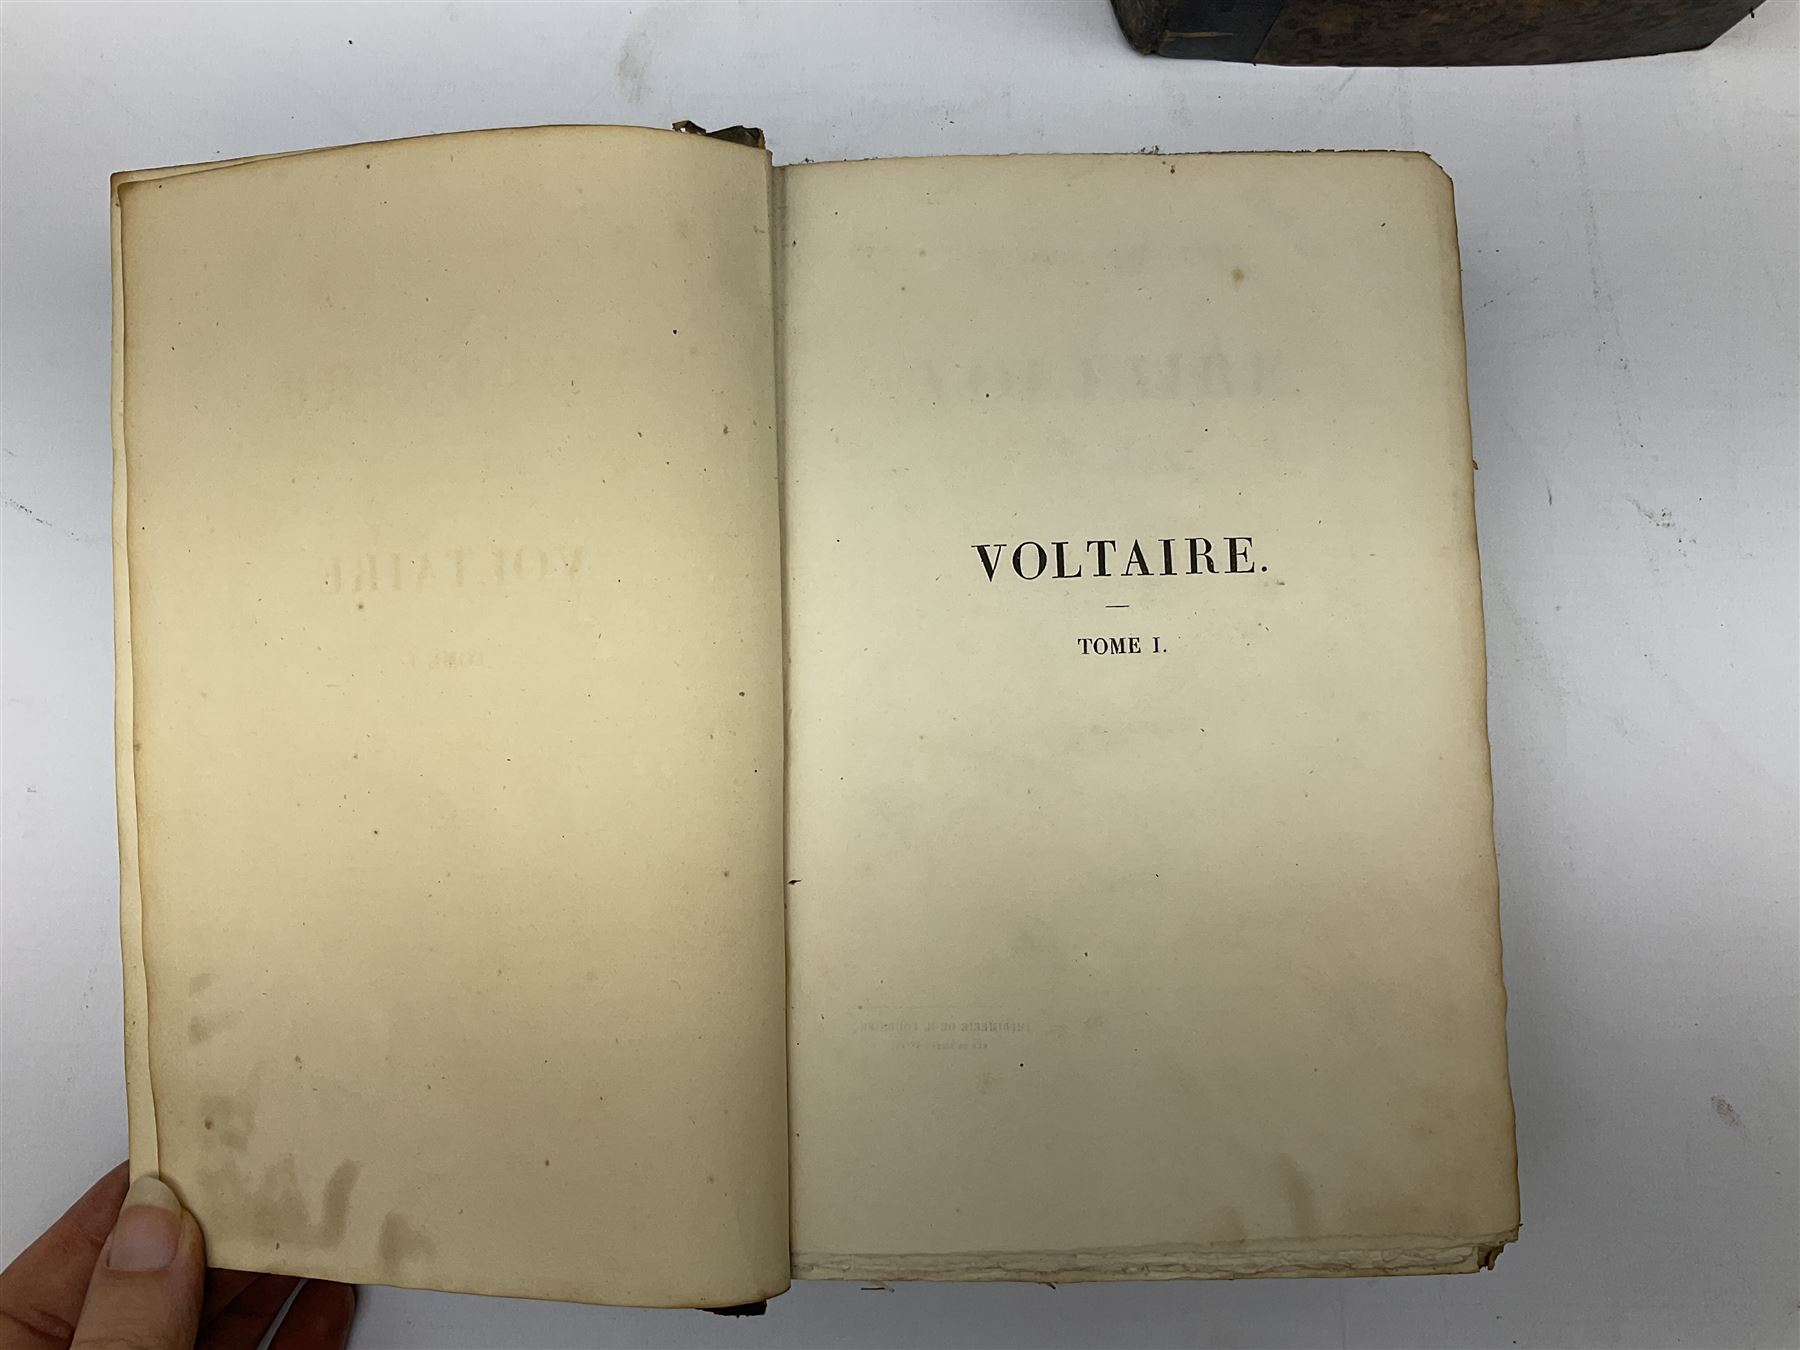 Eighteen 19th century leather bound books including Oeuvres Completes De Voltaire. 1827 Paris. Two v - Image 14 of 15